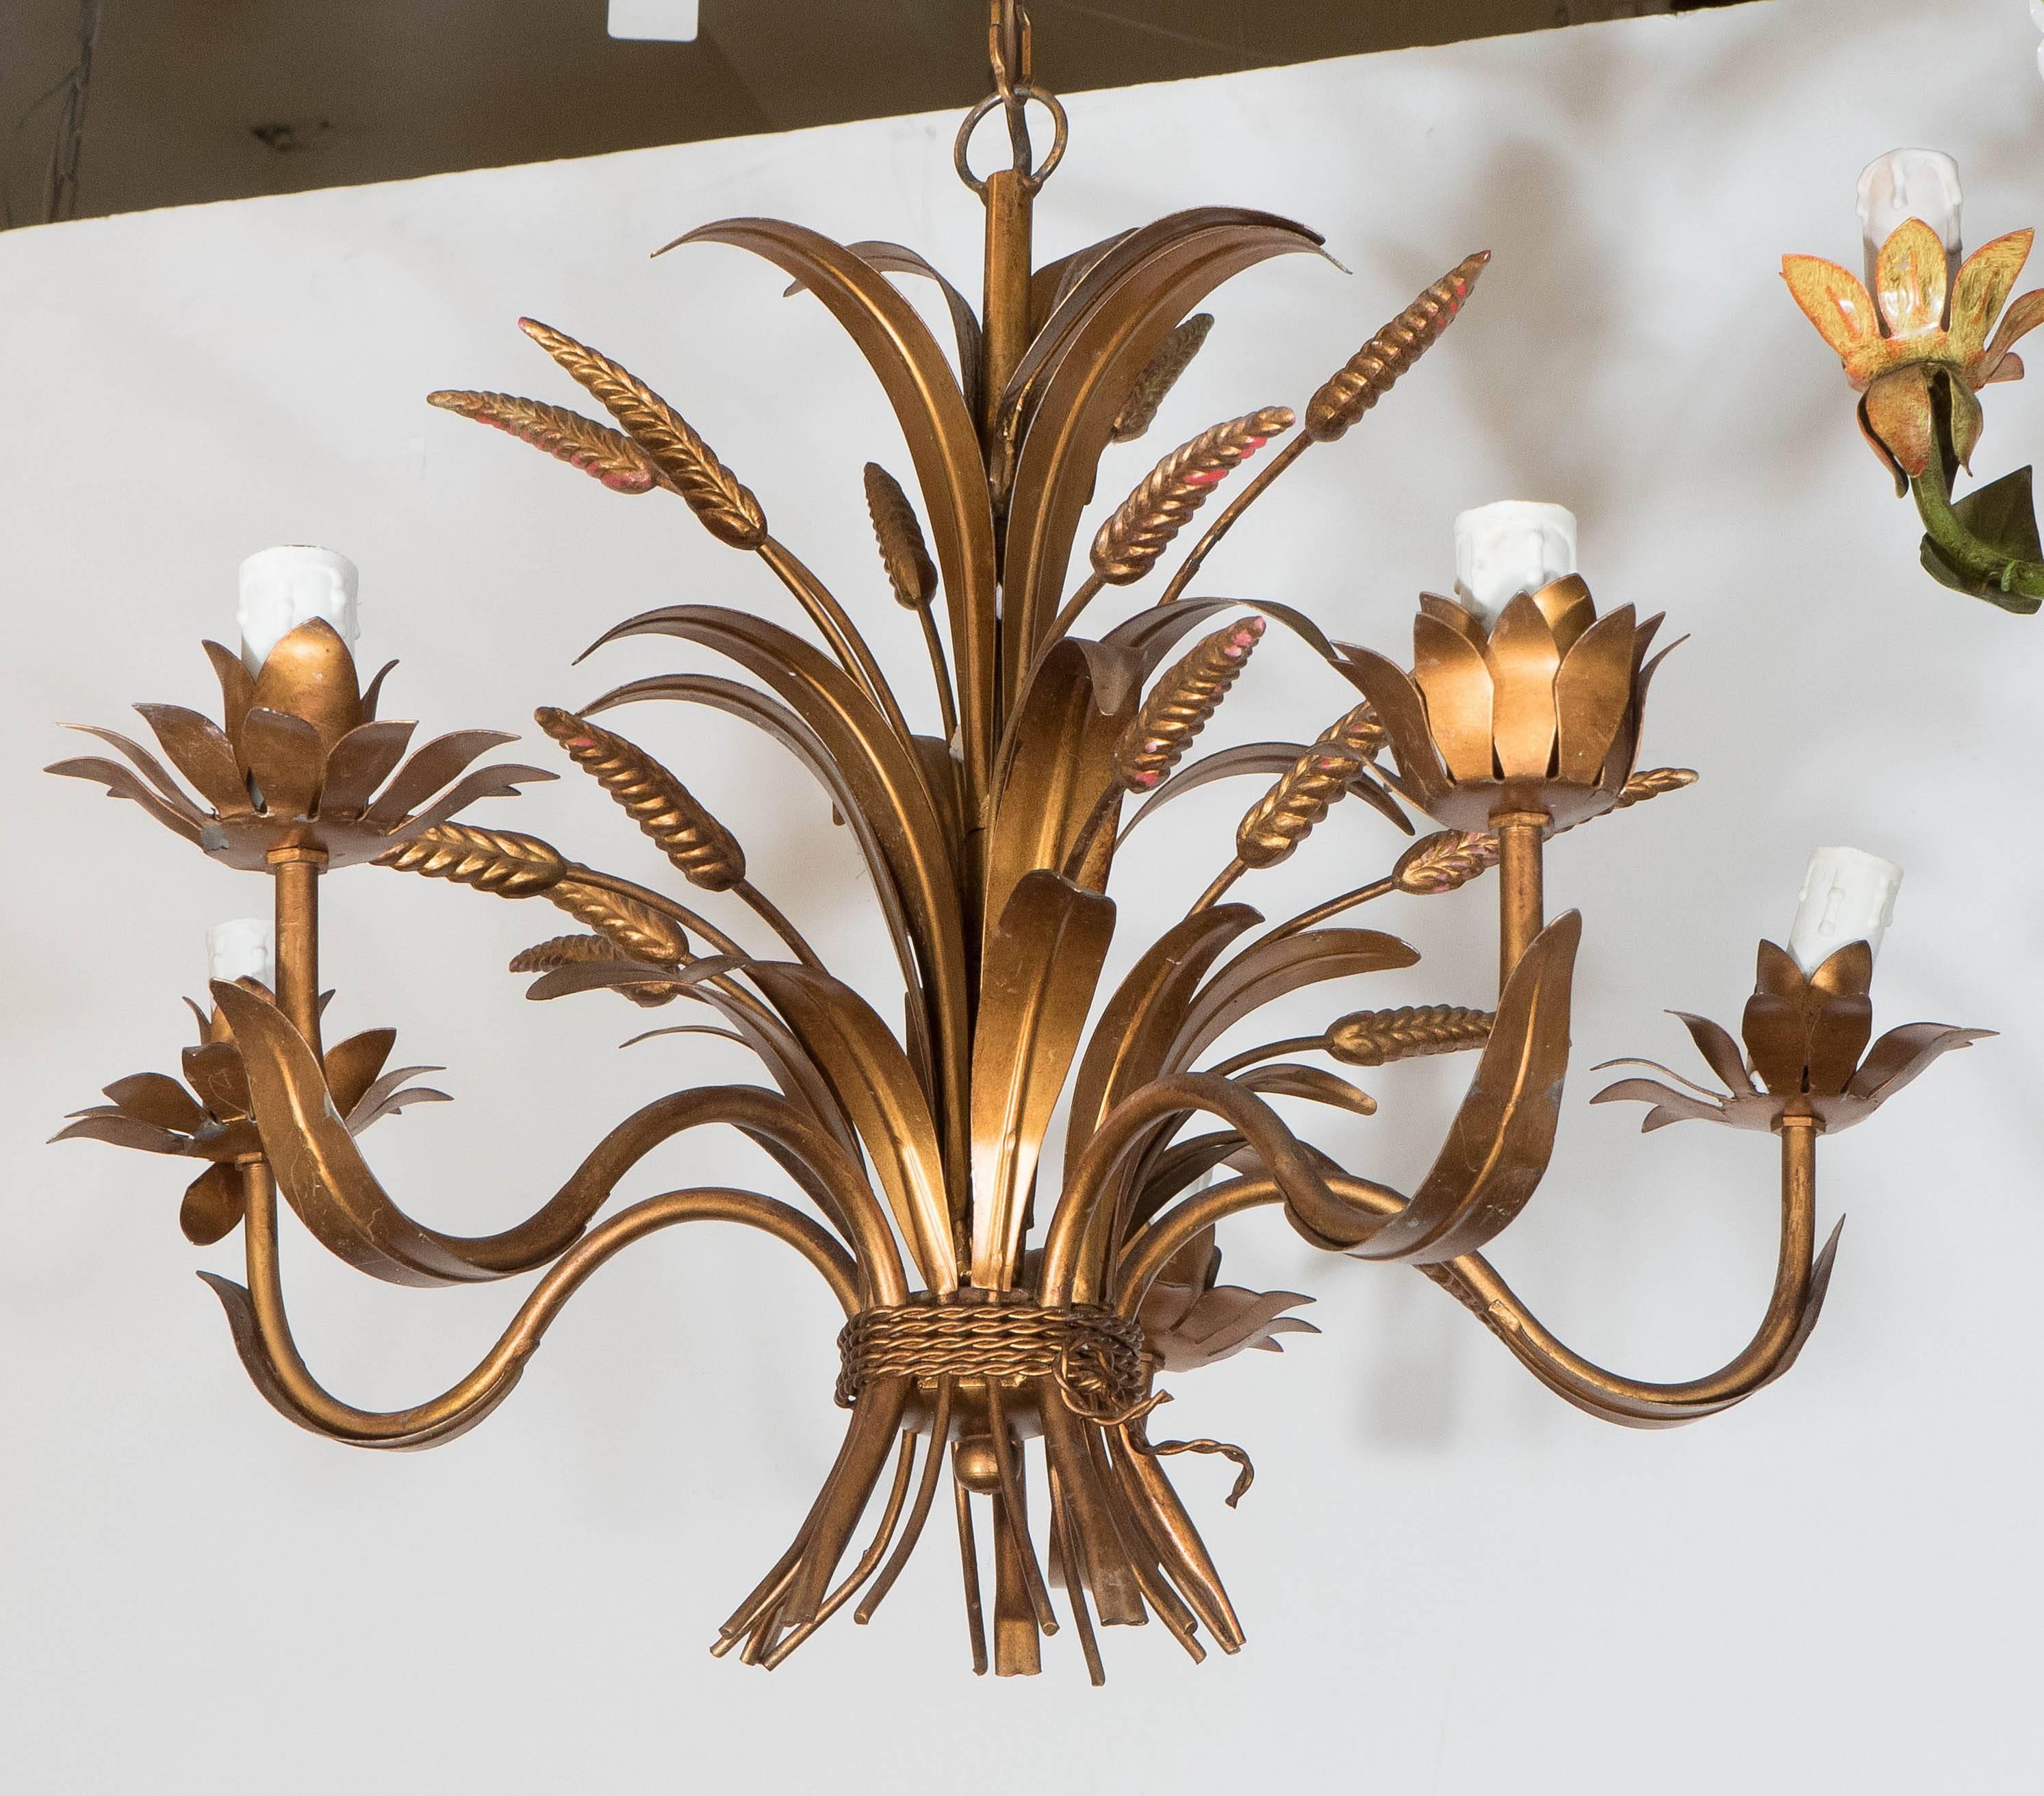 A vintage Hollywood Regency style five-arm chandelier, produced in France, circa 1960s, designed as an elaborate shaft of bound wheat and leaves, in gilt metal; includes socket covers with faux dripping wax. Wiring and sockets to US standard,